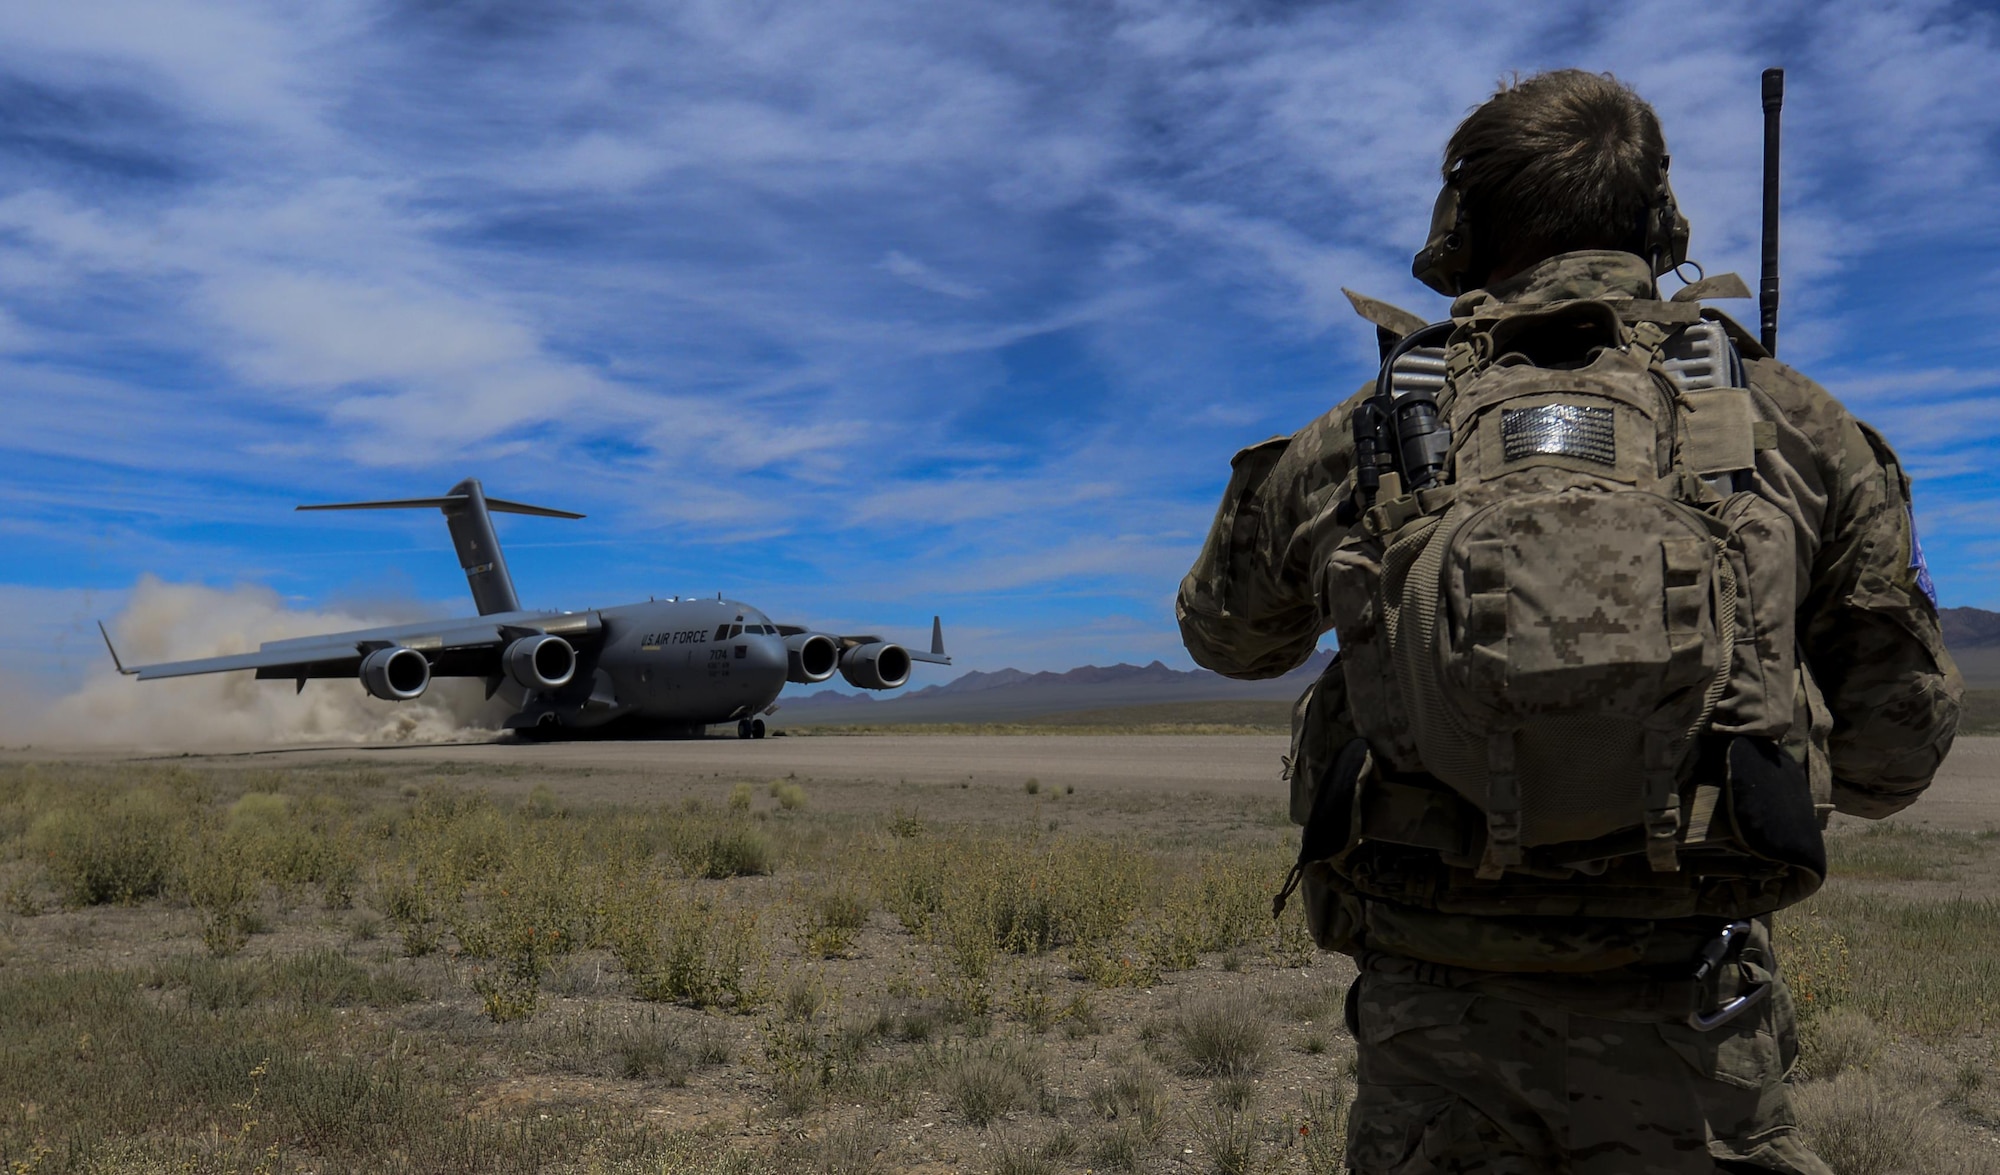 A Combat Controller watches as a C-17 assigned to the 17th Weapons Squadron, Nellis Air Force Base, Nevada, lands on an airstrip in the Nevada Test and Training Range during Joint Forcible Entry Exercise, June 16, 2016. The exercise demonstrates the Air Force’s ability to tactically deliver and recover combat forces via air drops and combat landings in a contested environment. (U.S. Air Force photo by Airman 1st Class Kevin Tanenbaum)